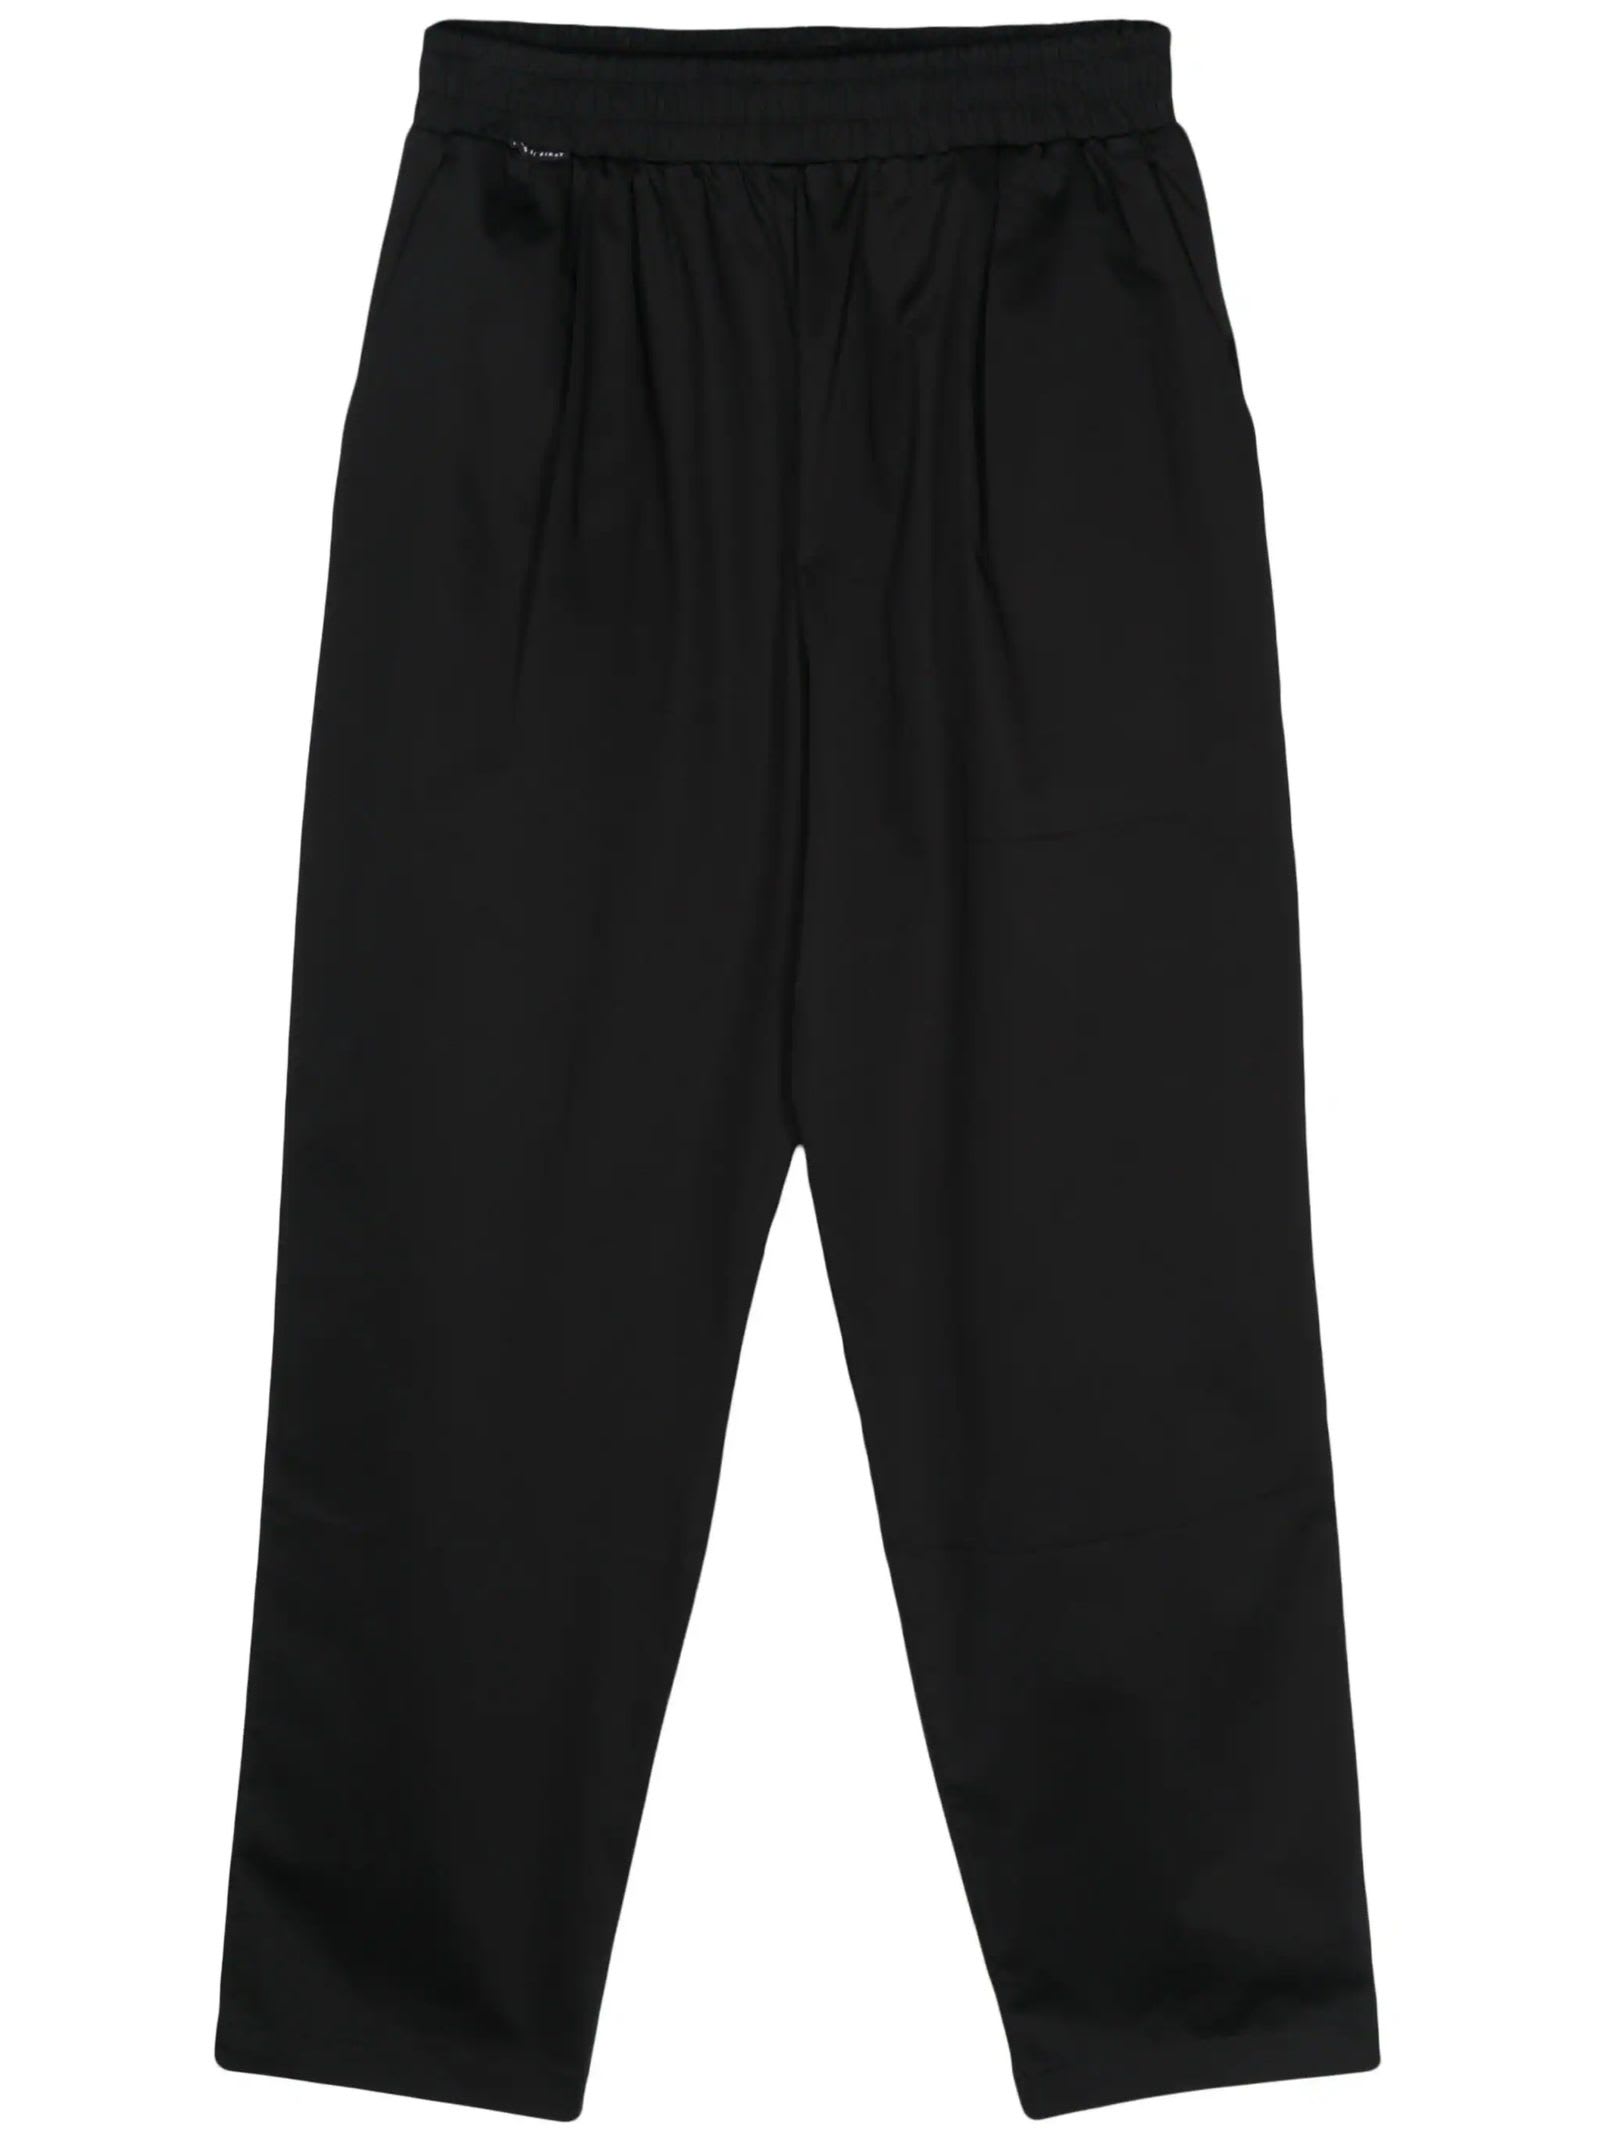 Family First Trousers Black